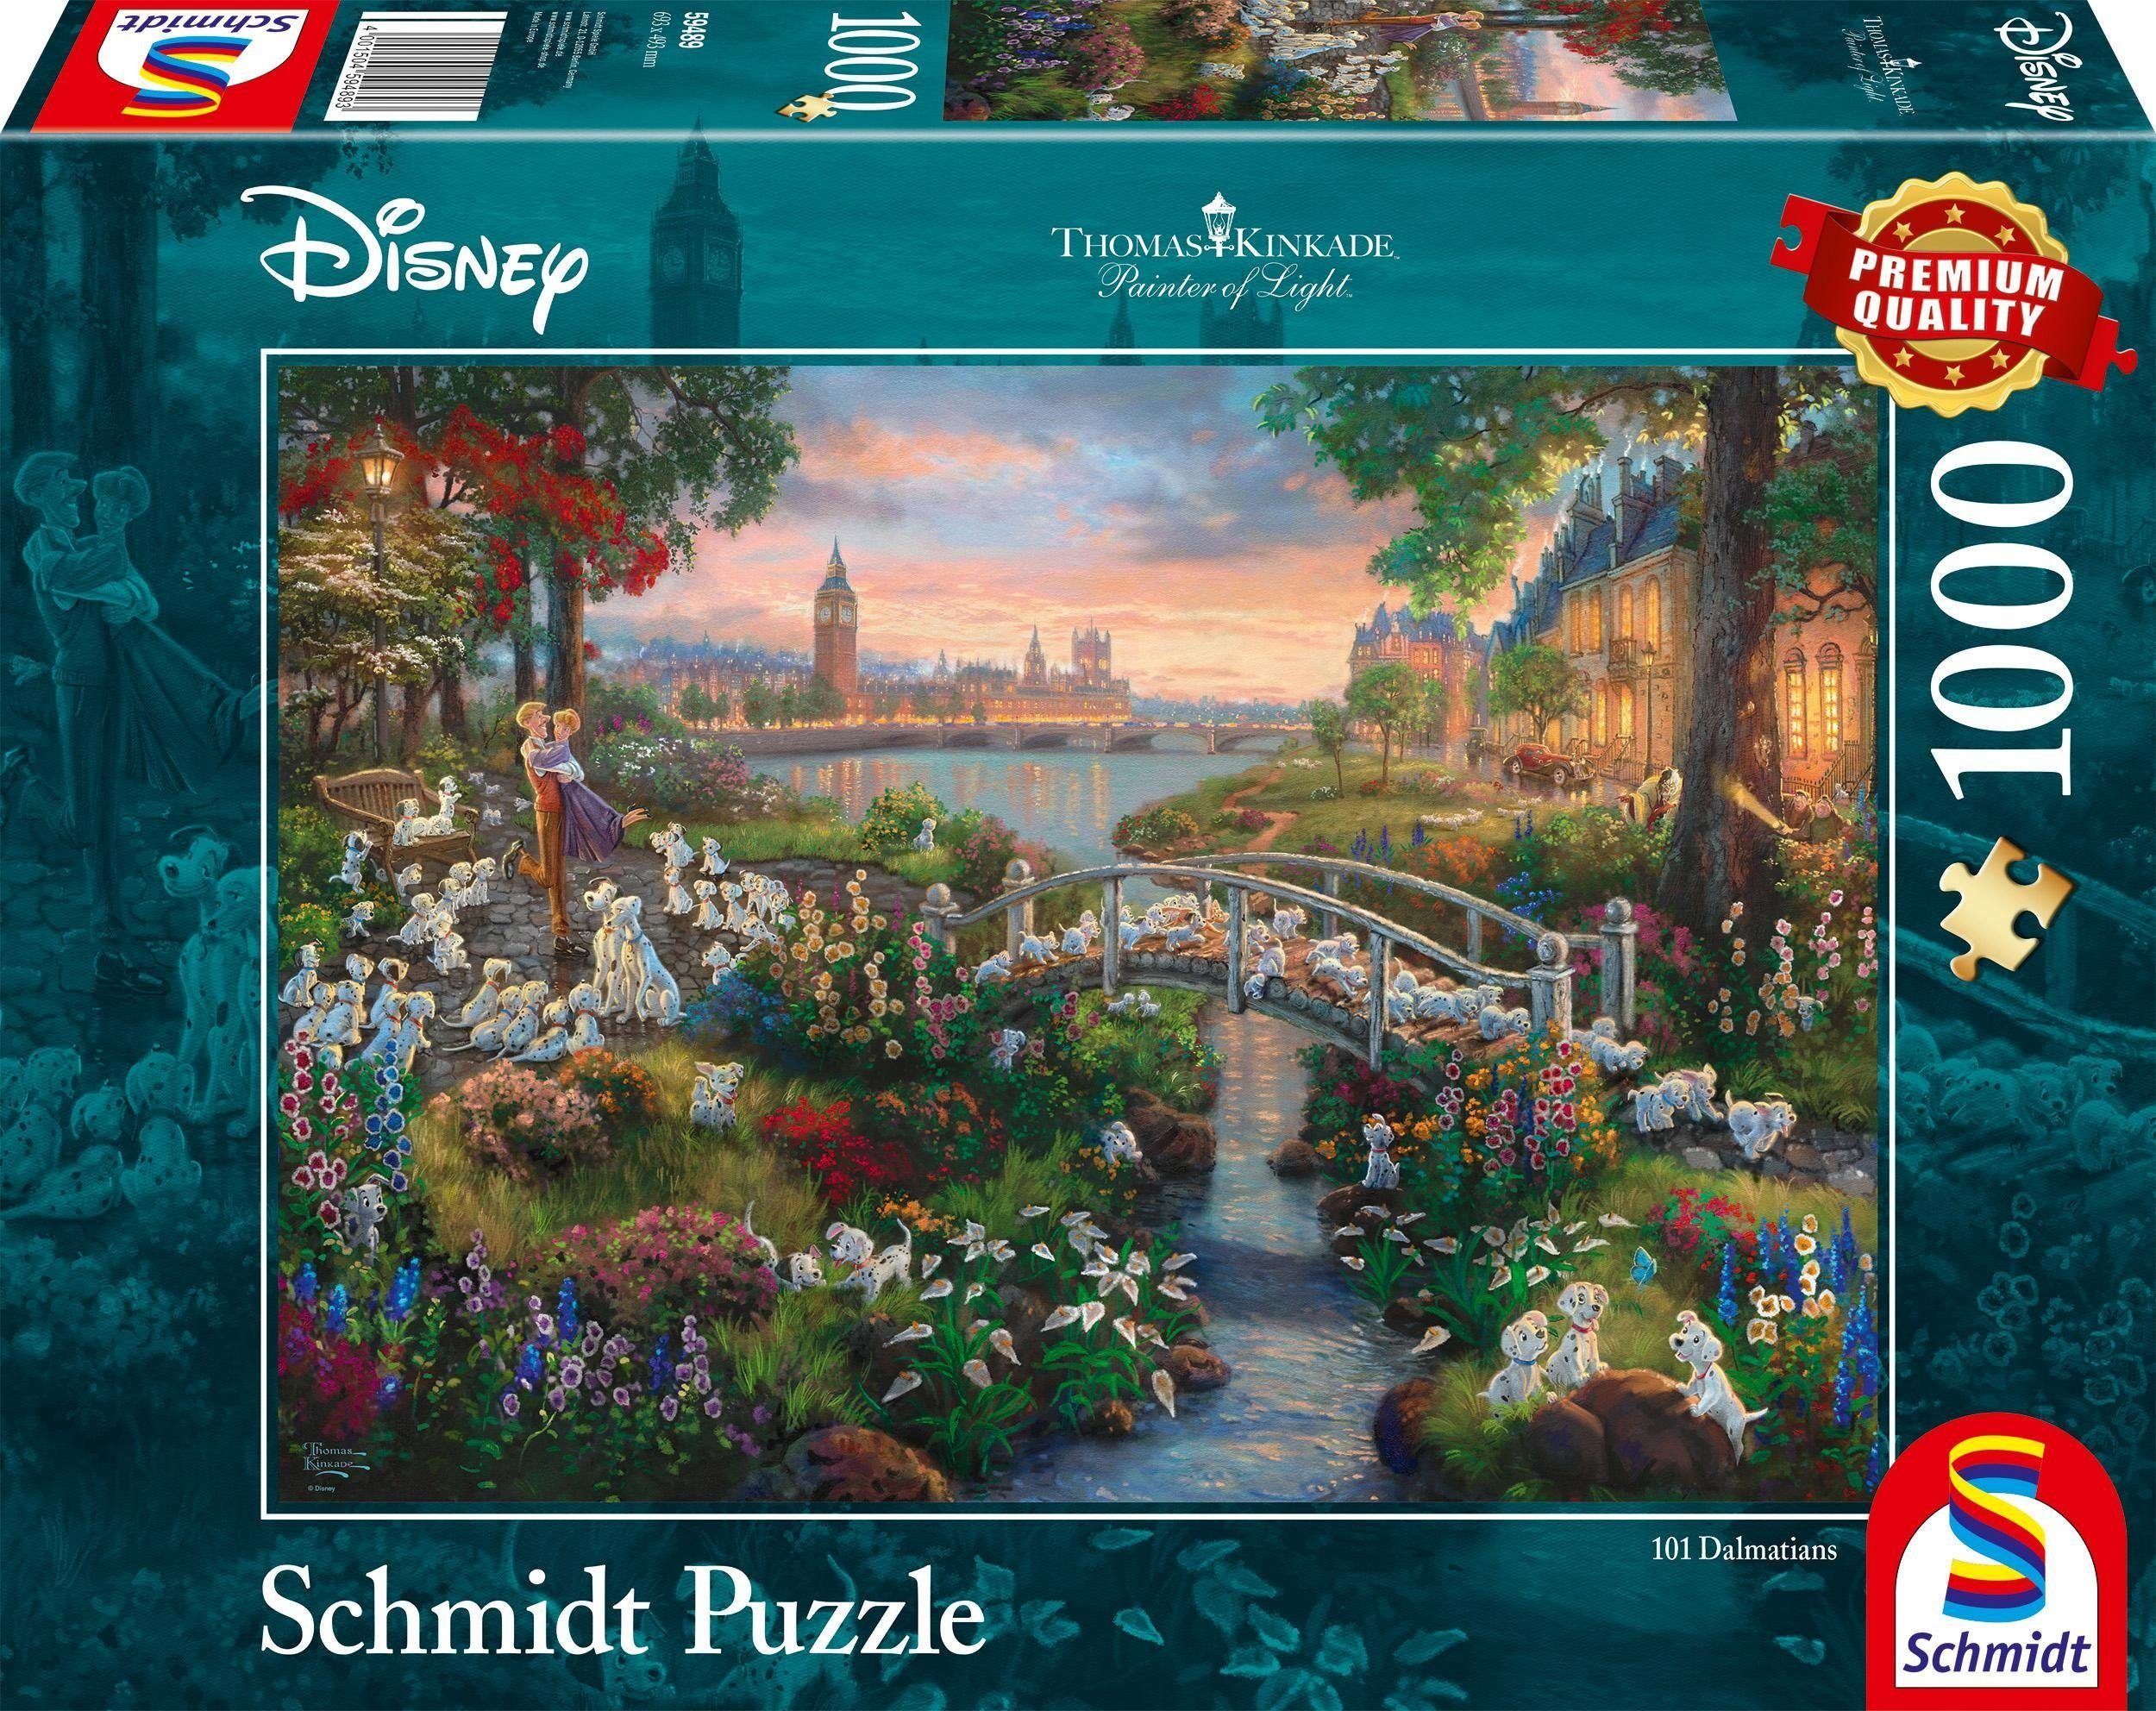 Schmidt Spiele Puzzle Disney, Dalmatiner, 101 in Puzzleteile, Made 1000 Germany